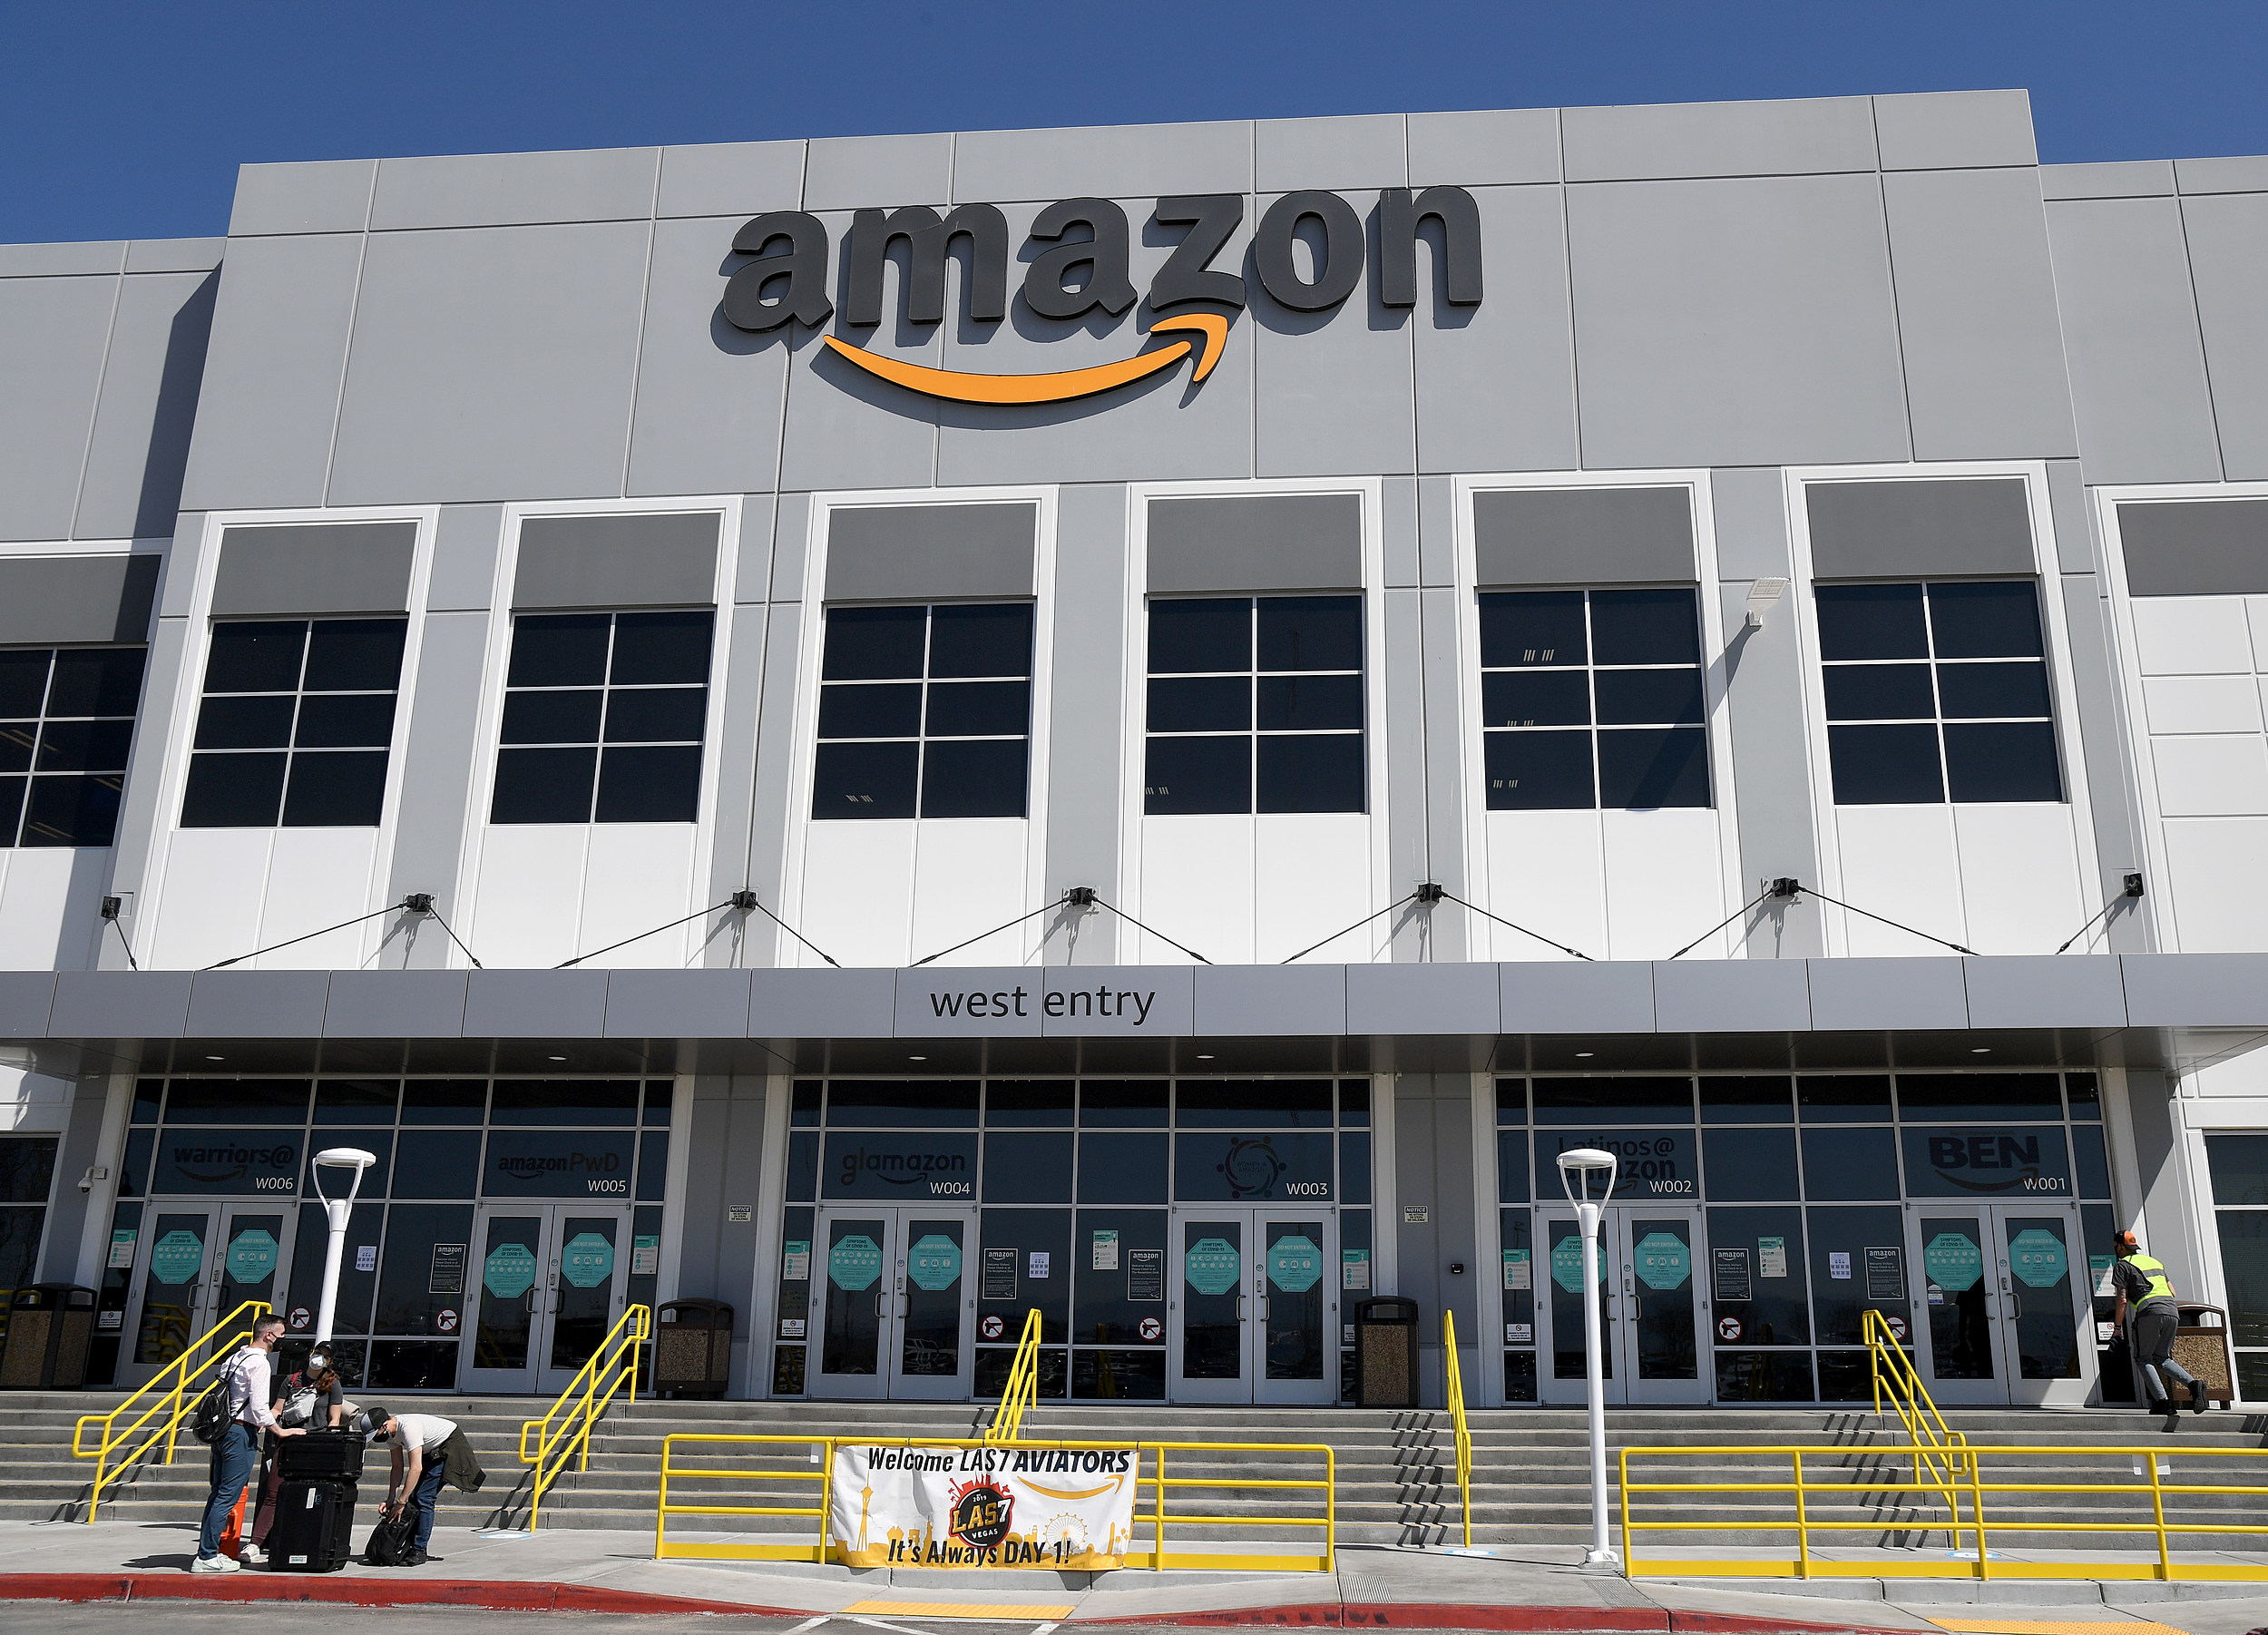 Another big Amazon facility planned for New Jersey